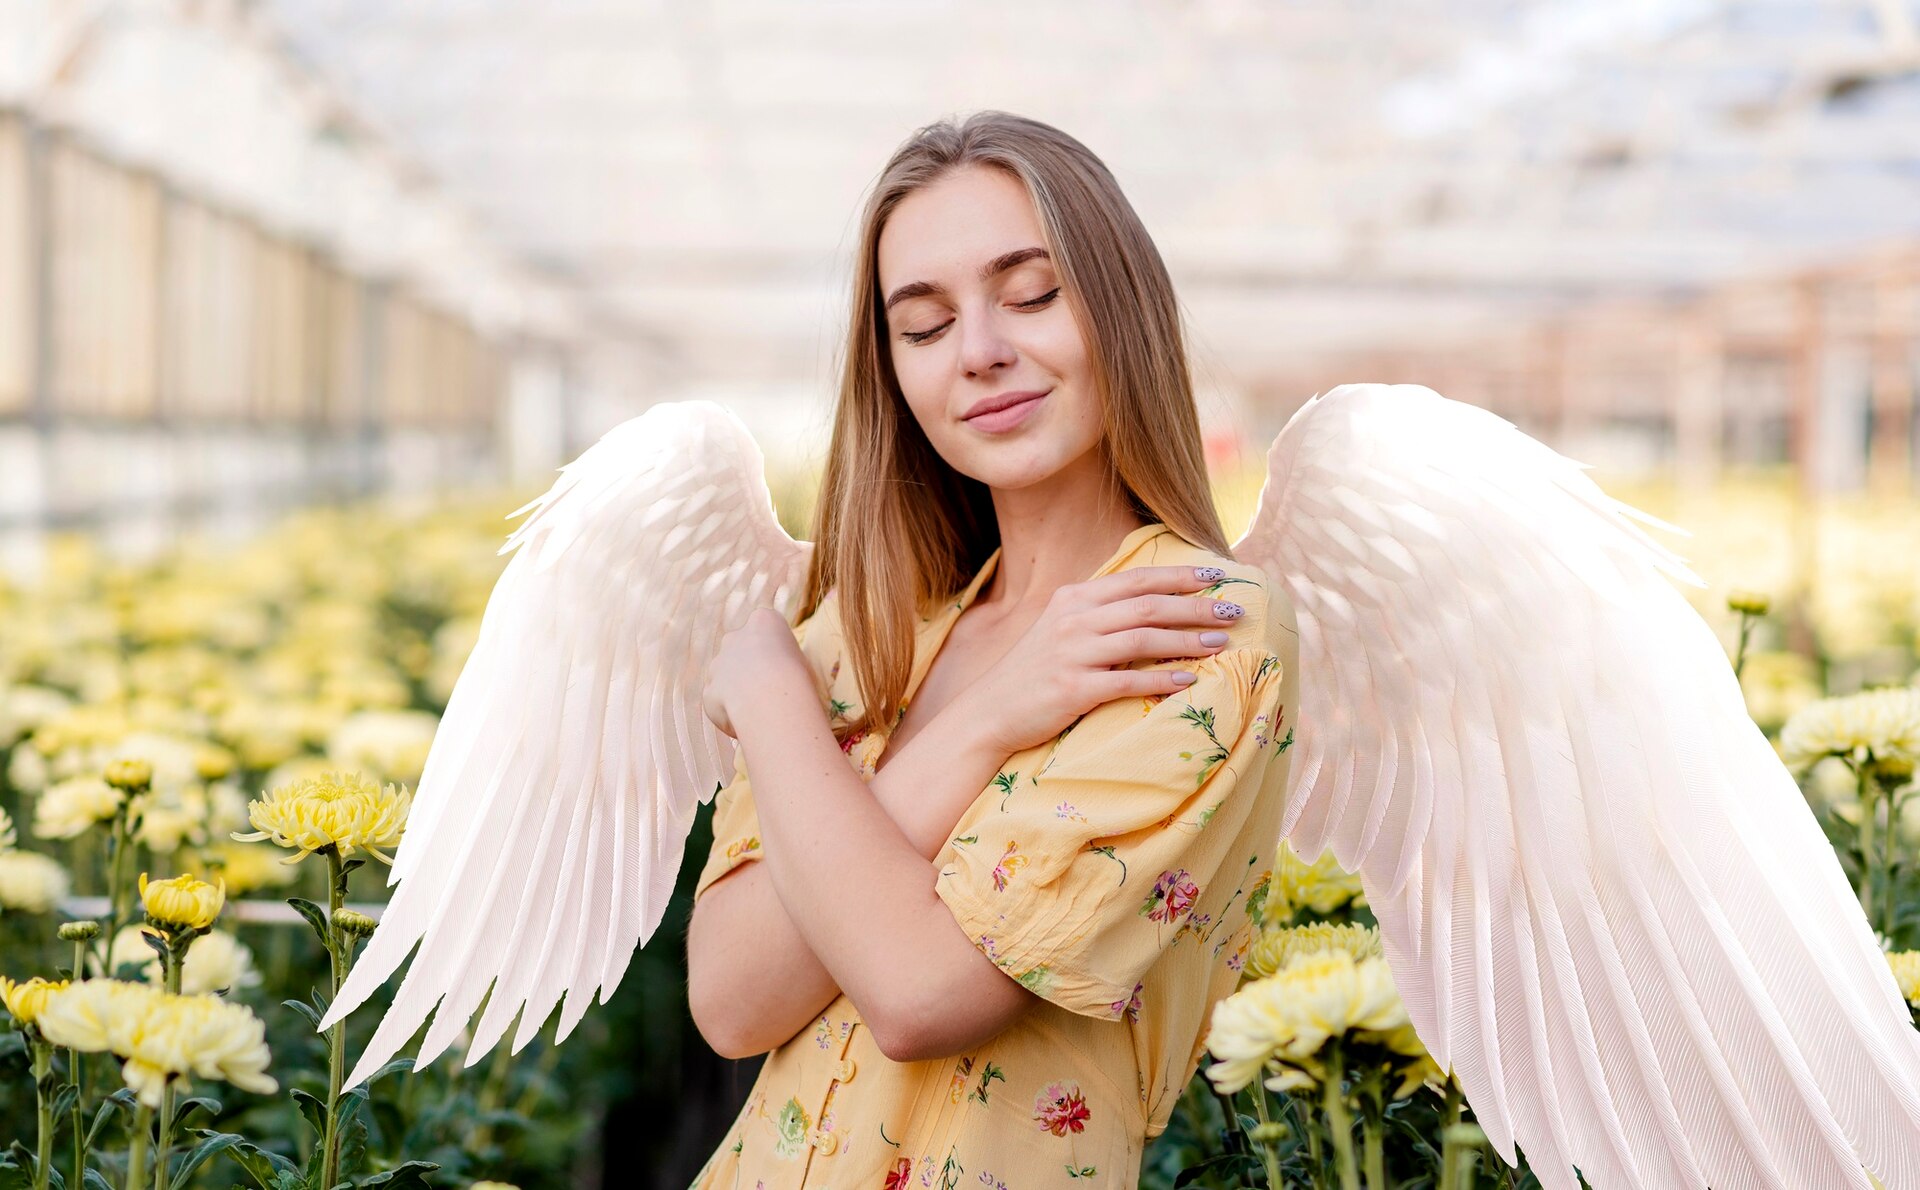 Signs Your Guardian Angel is Trying to Contact You